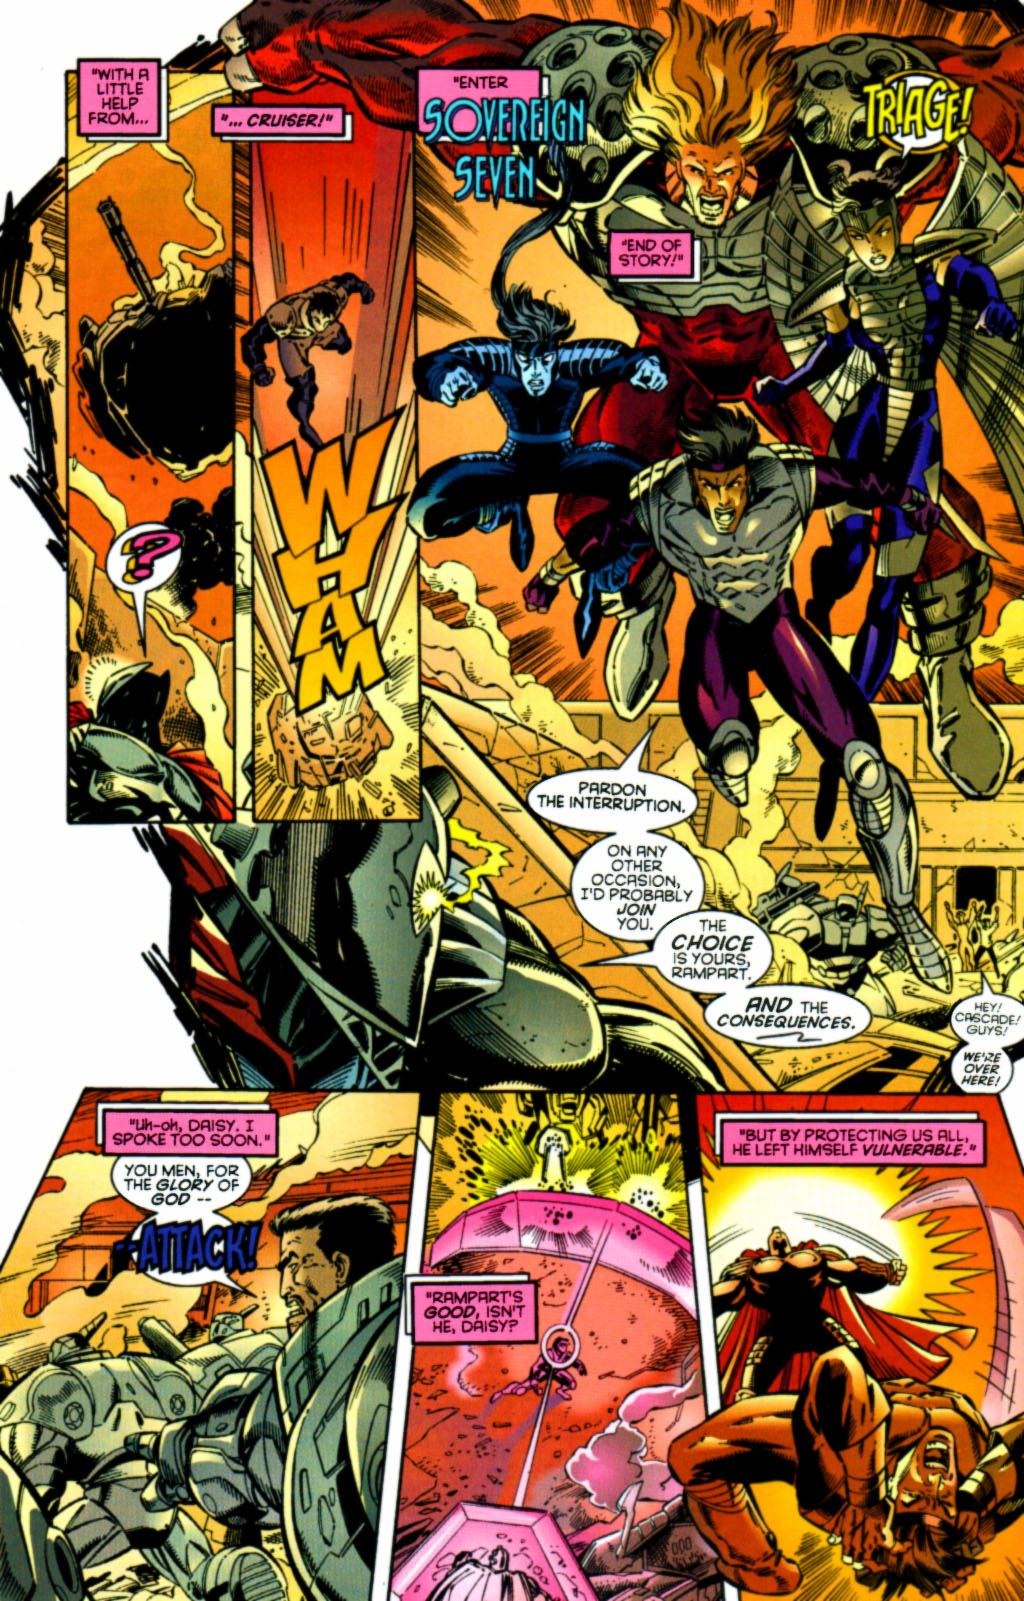 Read online Sovereign Seven comic -  Issue #13 - 13